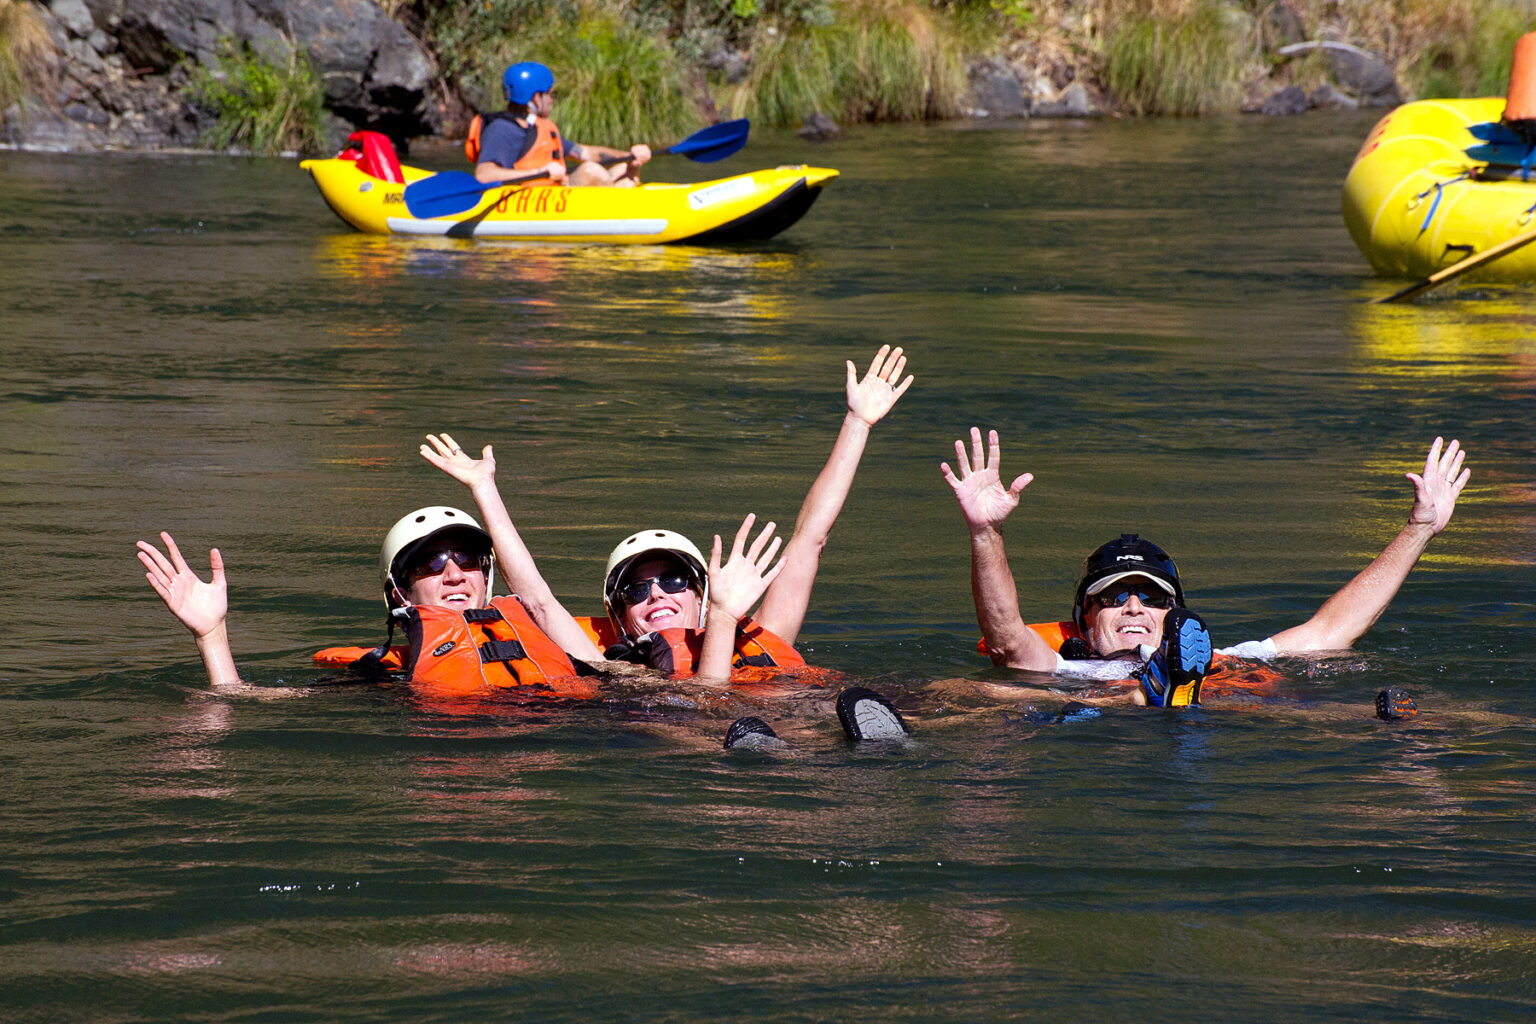 Rogue River Rafting Family Vacations with ECHO River Trips